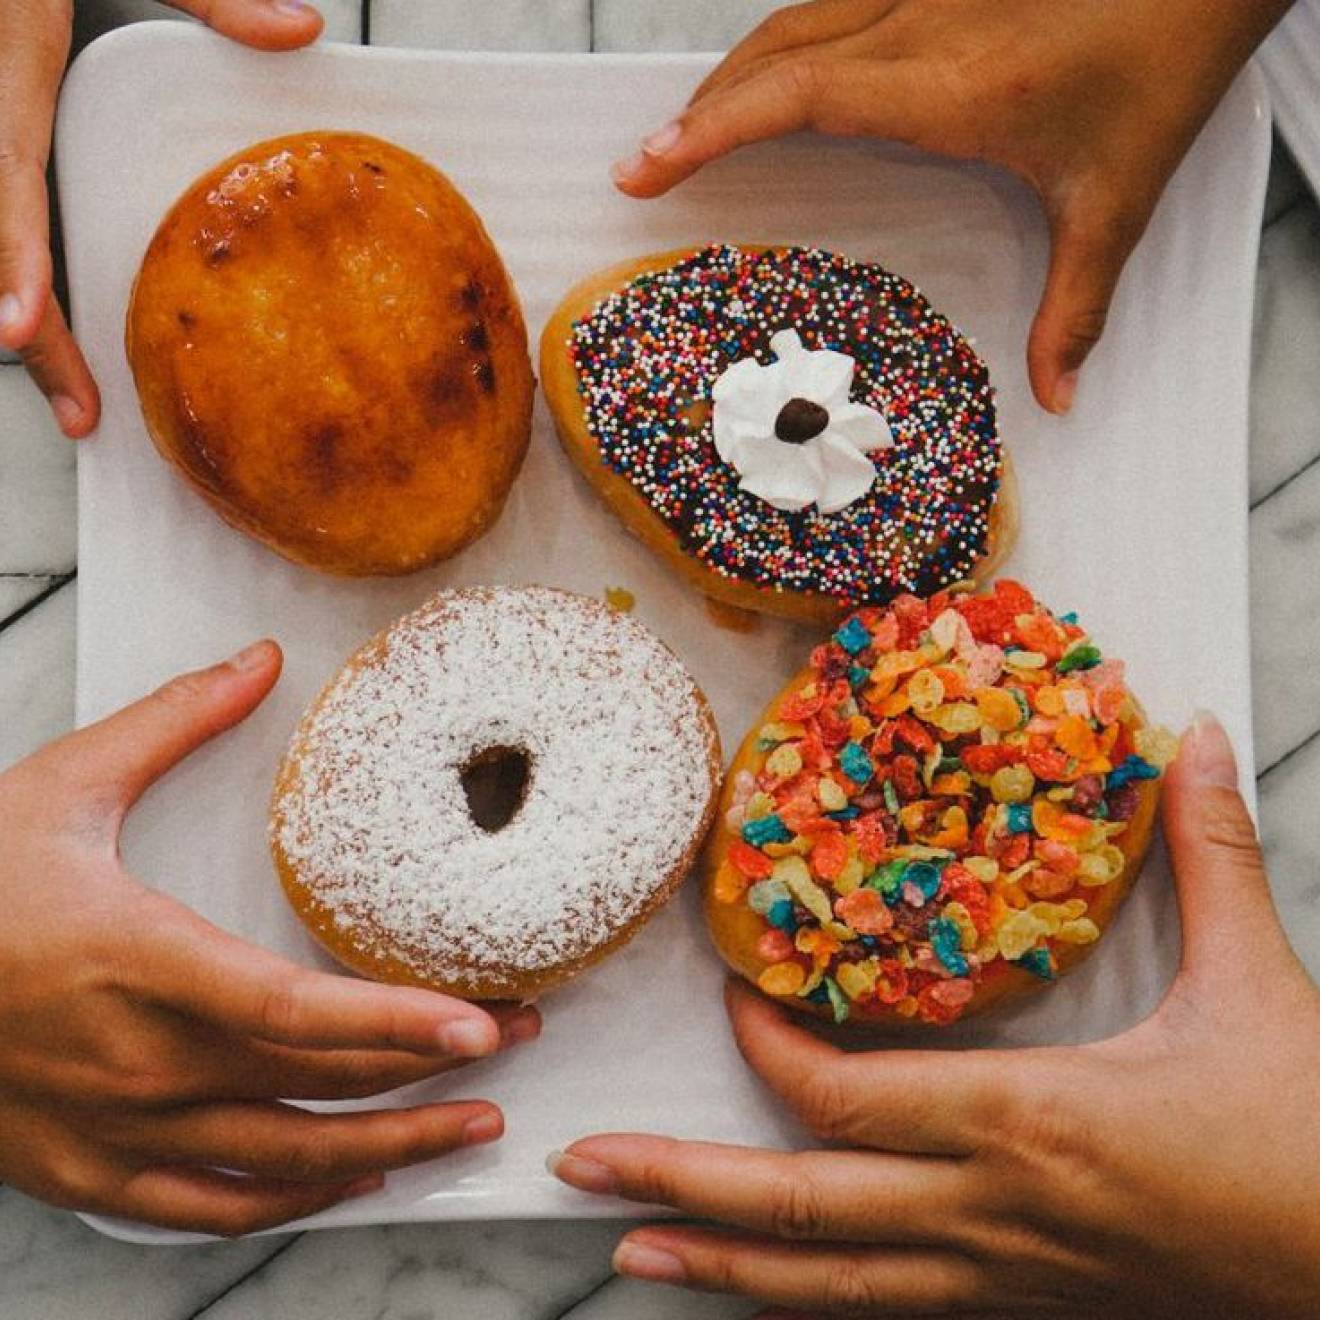 Multiple hands reaching for donuts